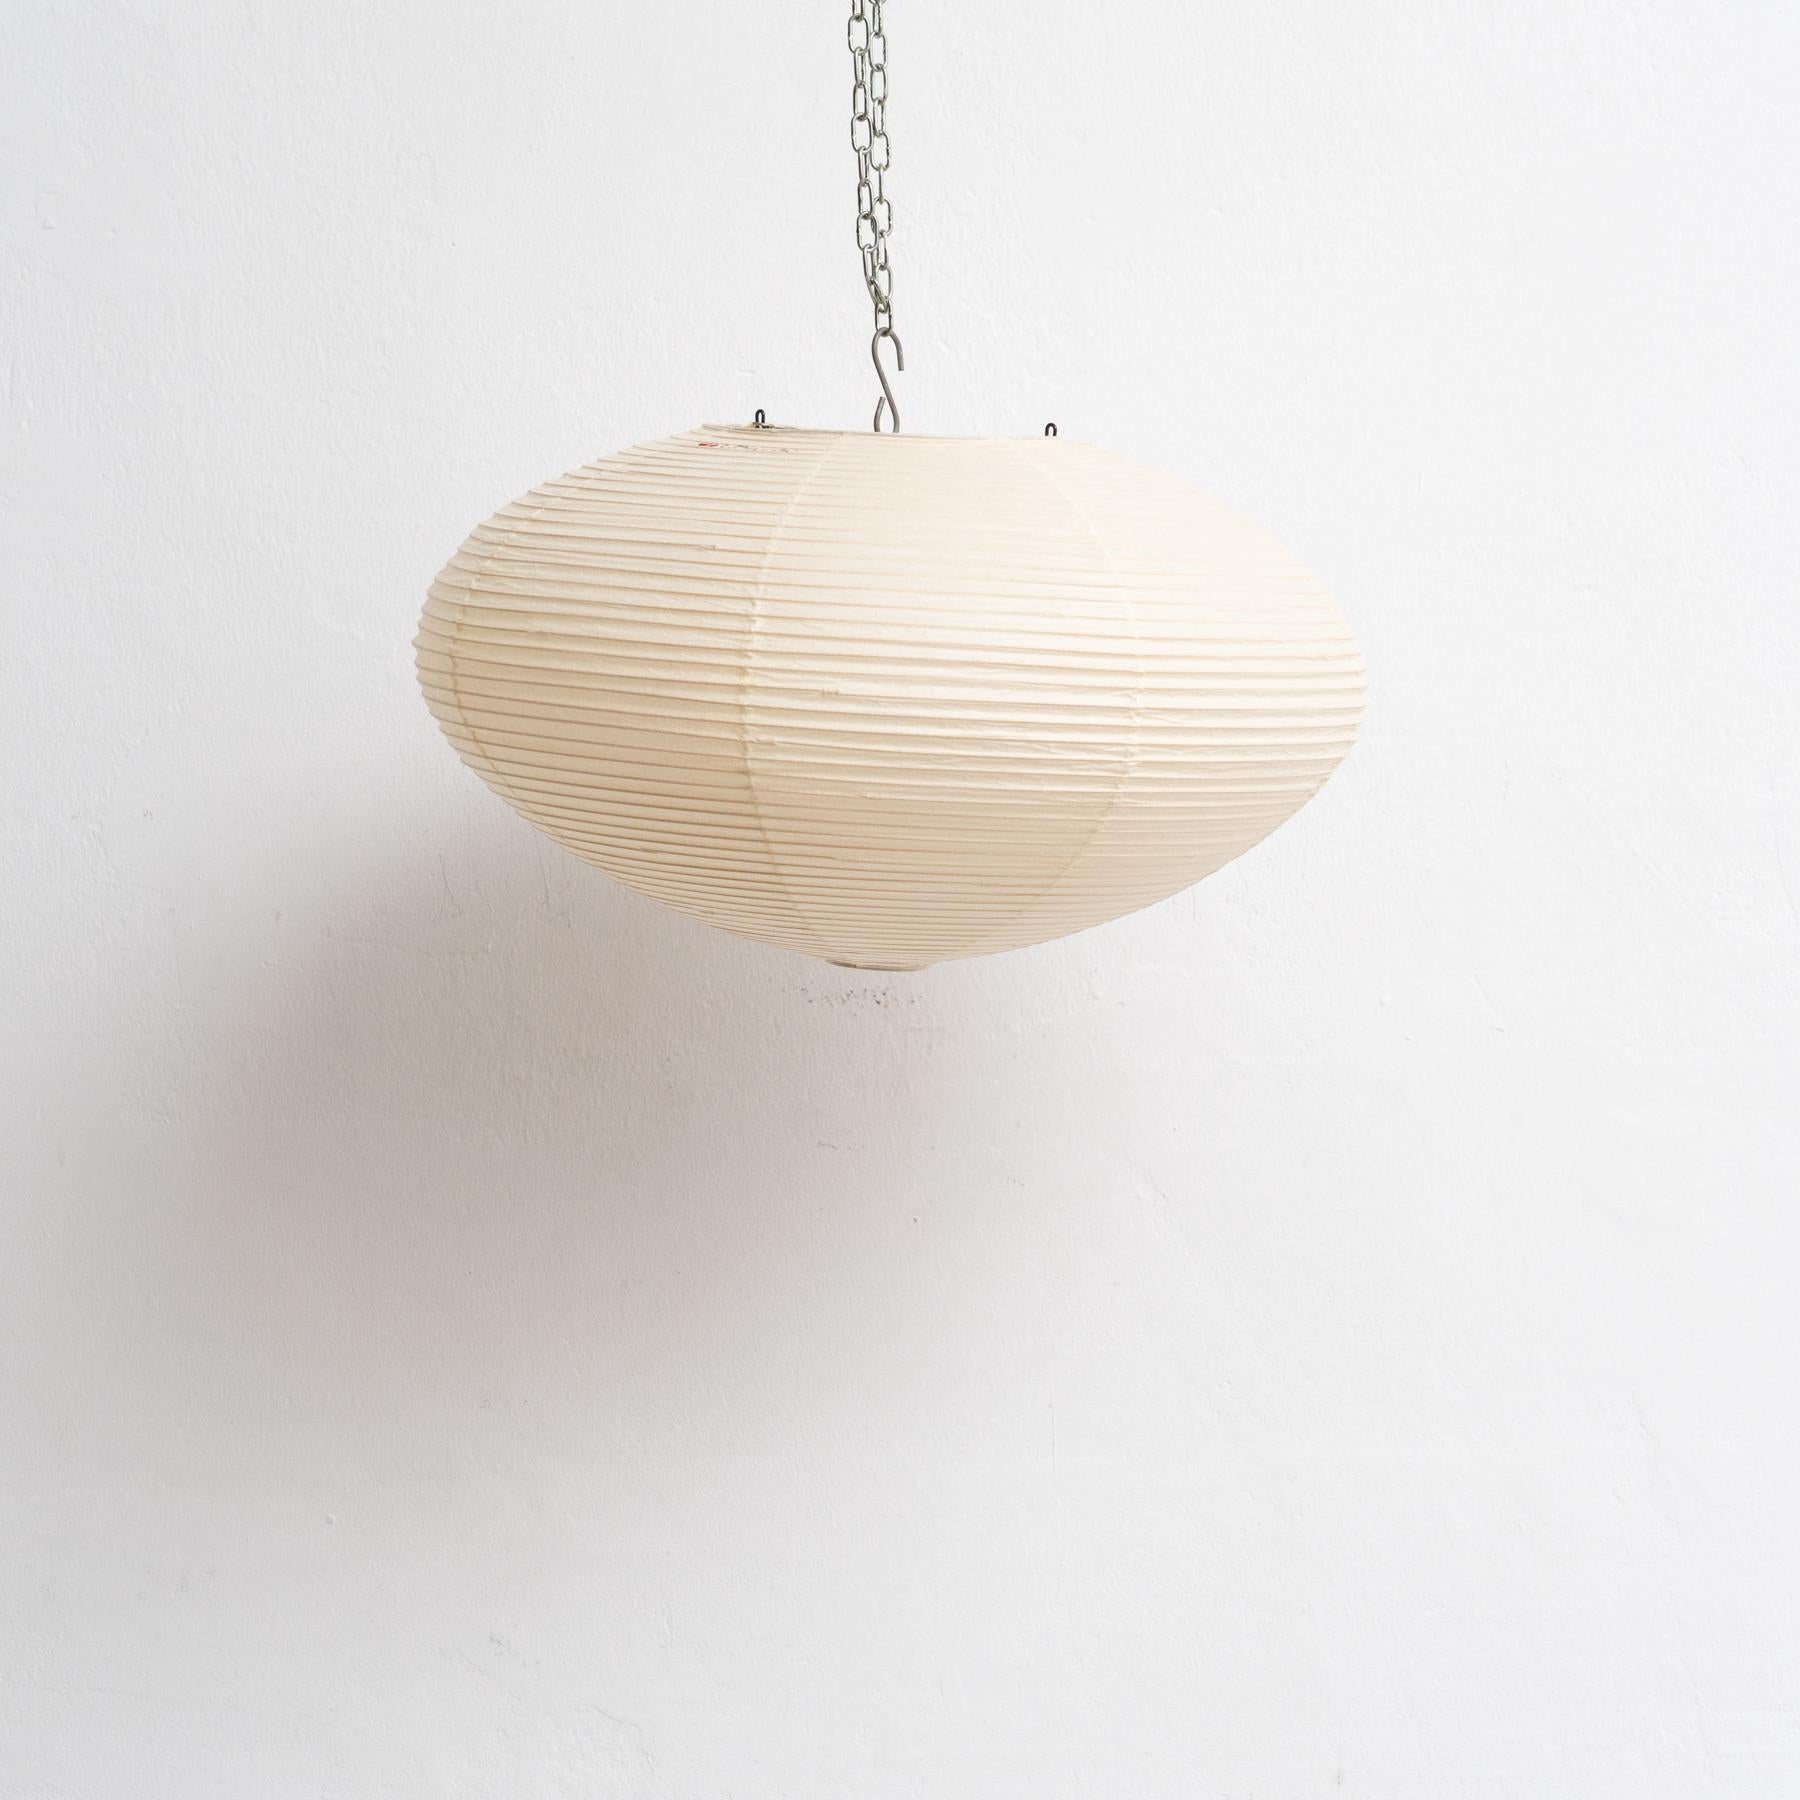 26A ceiling lamp, designed by Isamu Noguchi.
Manufactured by Ozeki & Company Ltd. (Japan.)
Bamboo ribbing structure covered by washi paper manufactured according to the traditional procedures.

In good vintage condition.

Edition signed with stamped